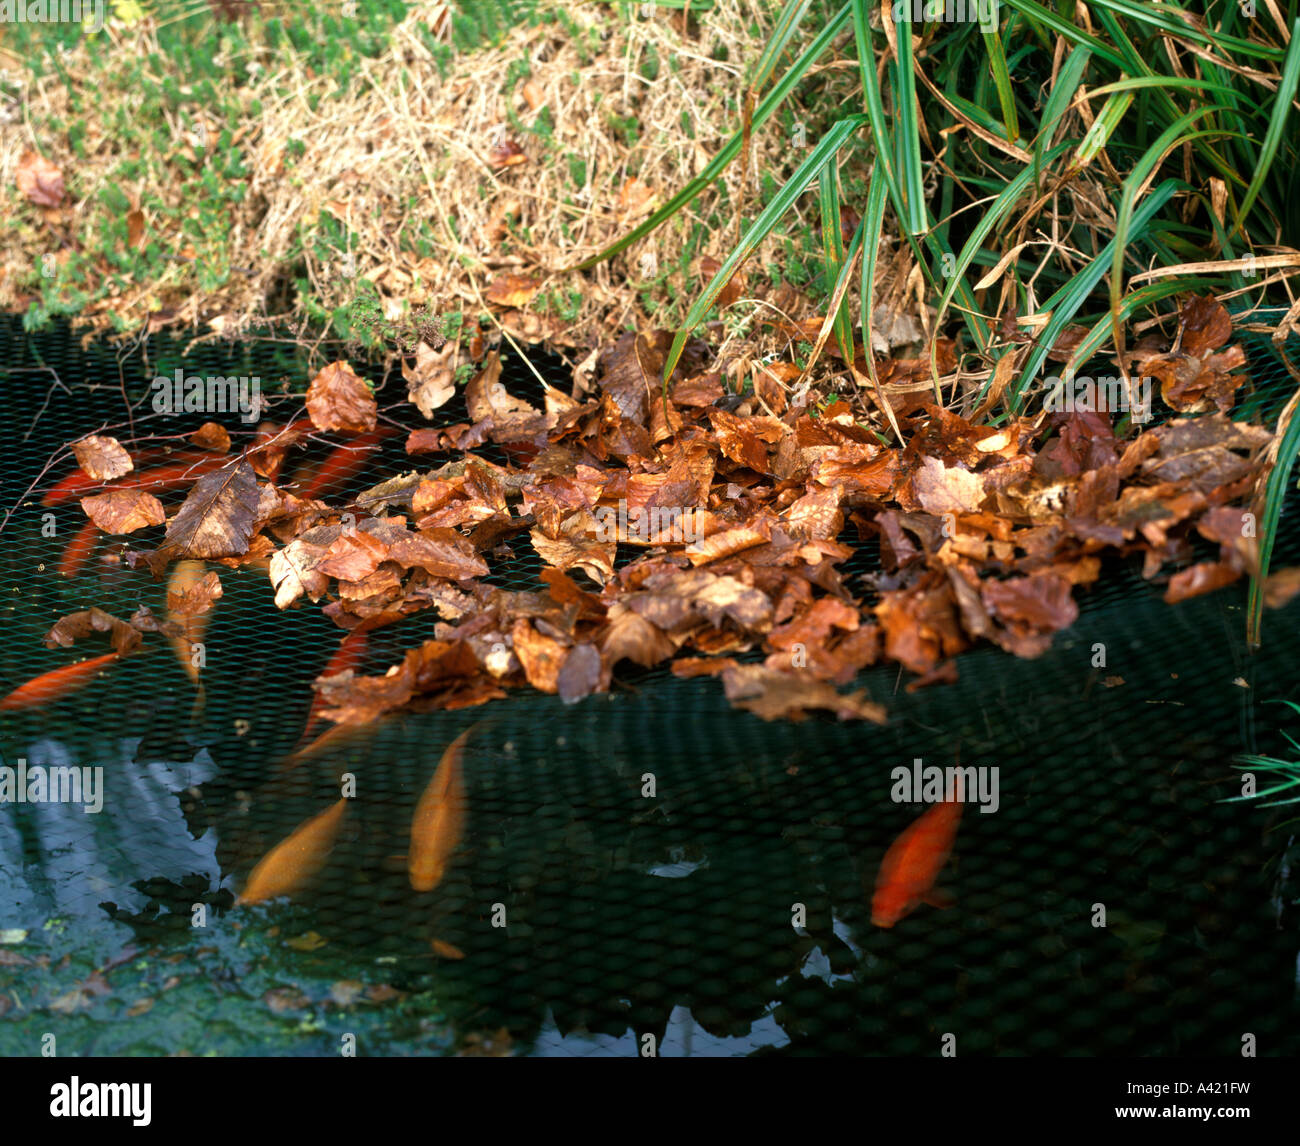 https://c8.alamy.com/comp/A421FW/use-a-net-to-keep-autumn-leaves-out-of-the-pond-A421FW.jpg